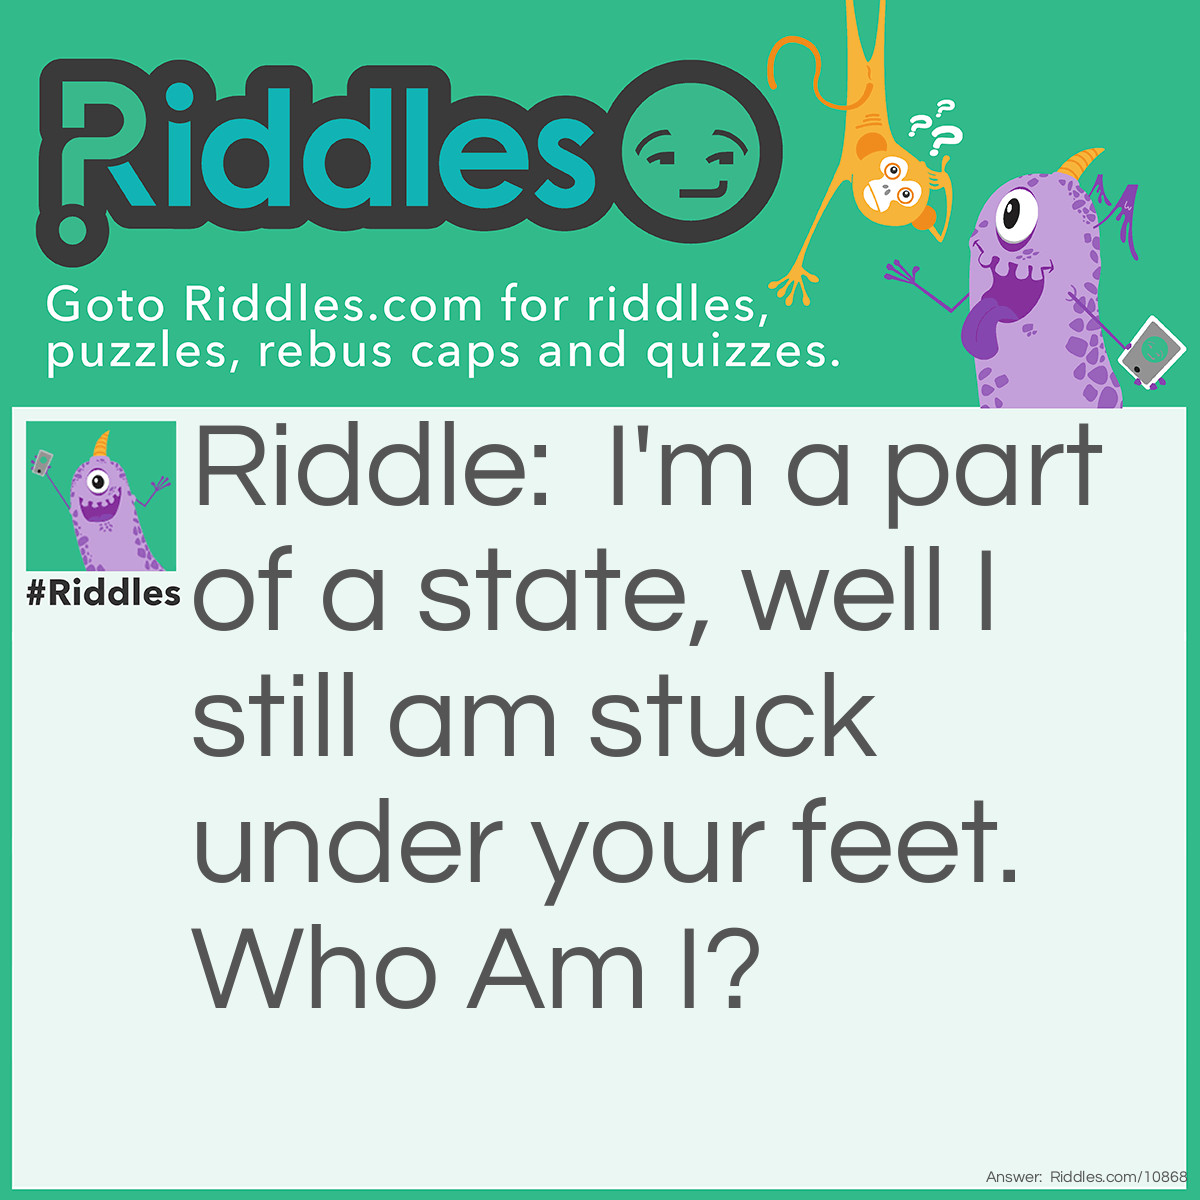 Riddle: I'm a part of a state, well I still am stuck under your feet. Who Am I? Answer: Floor.